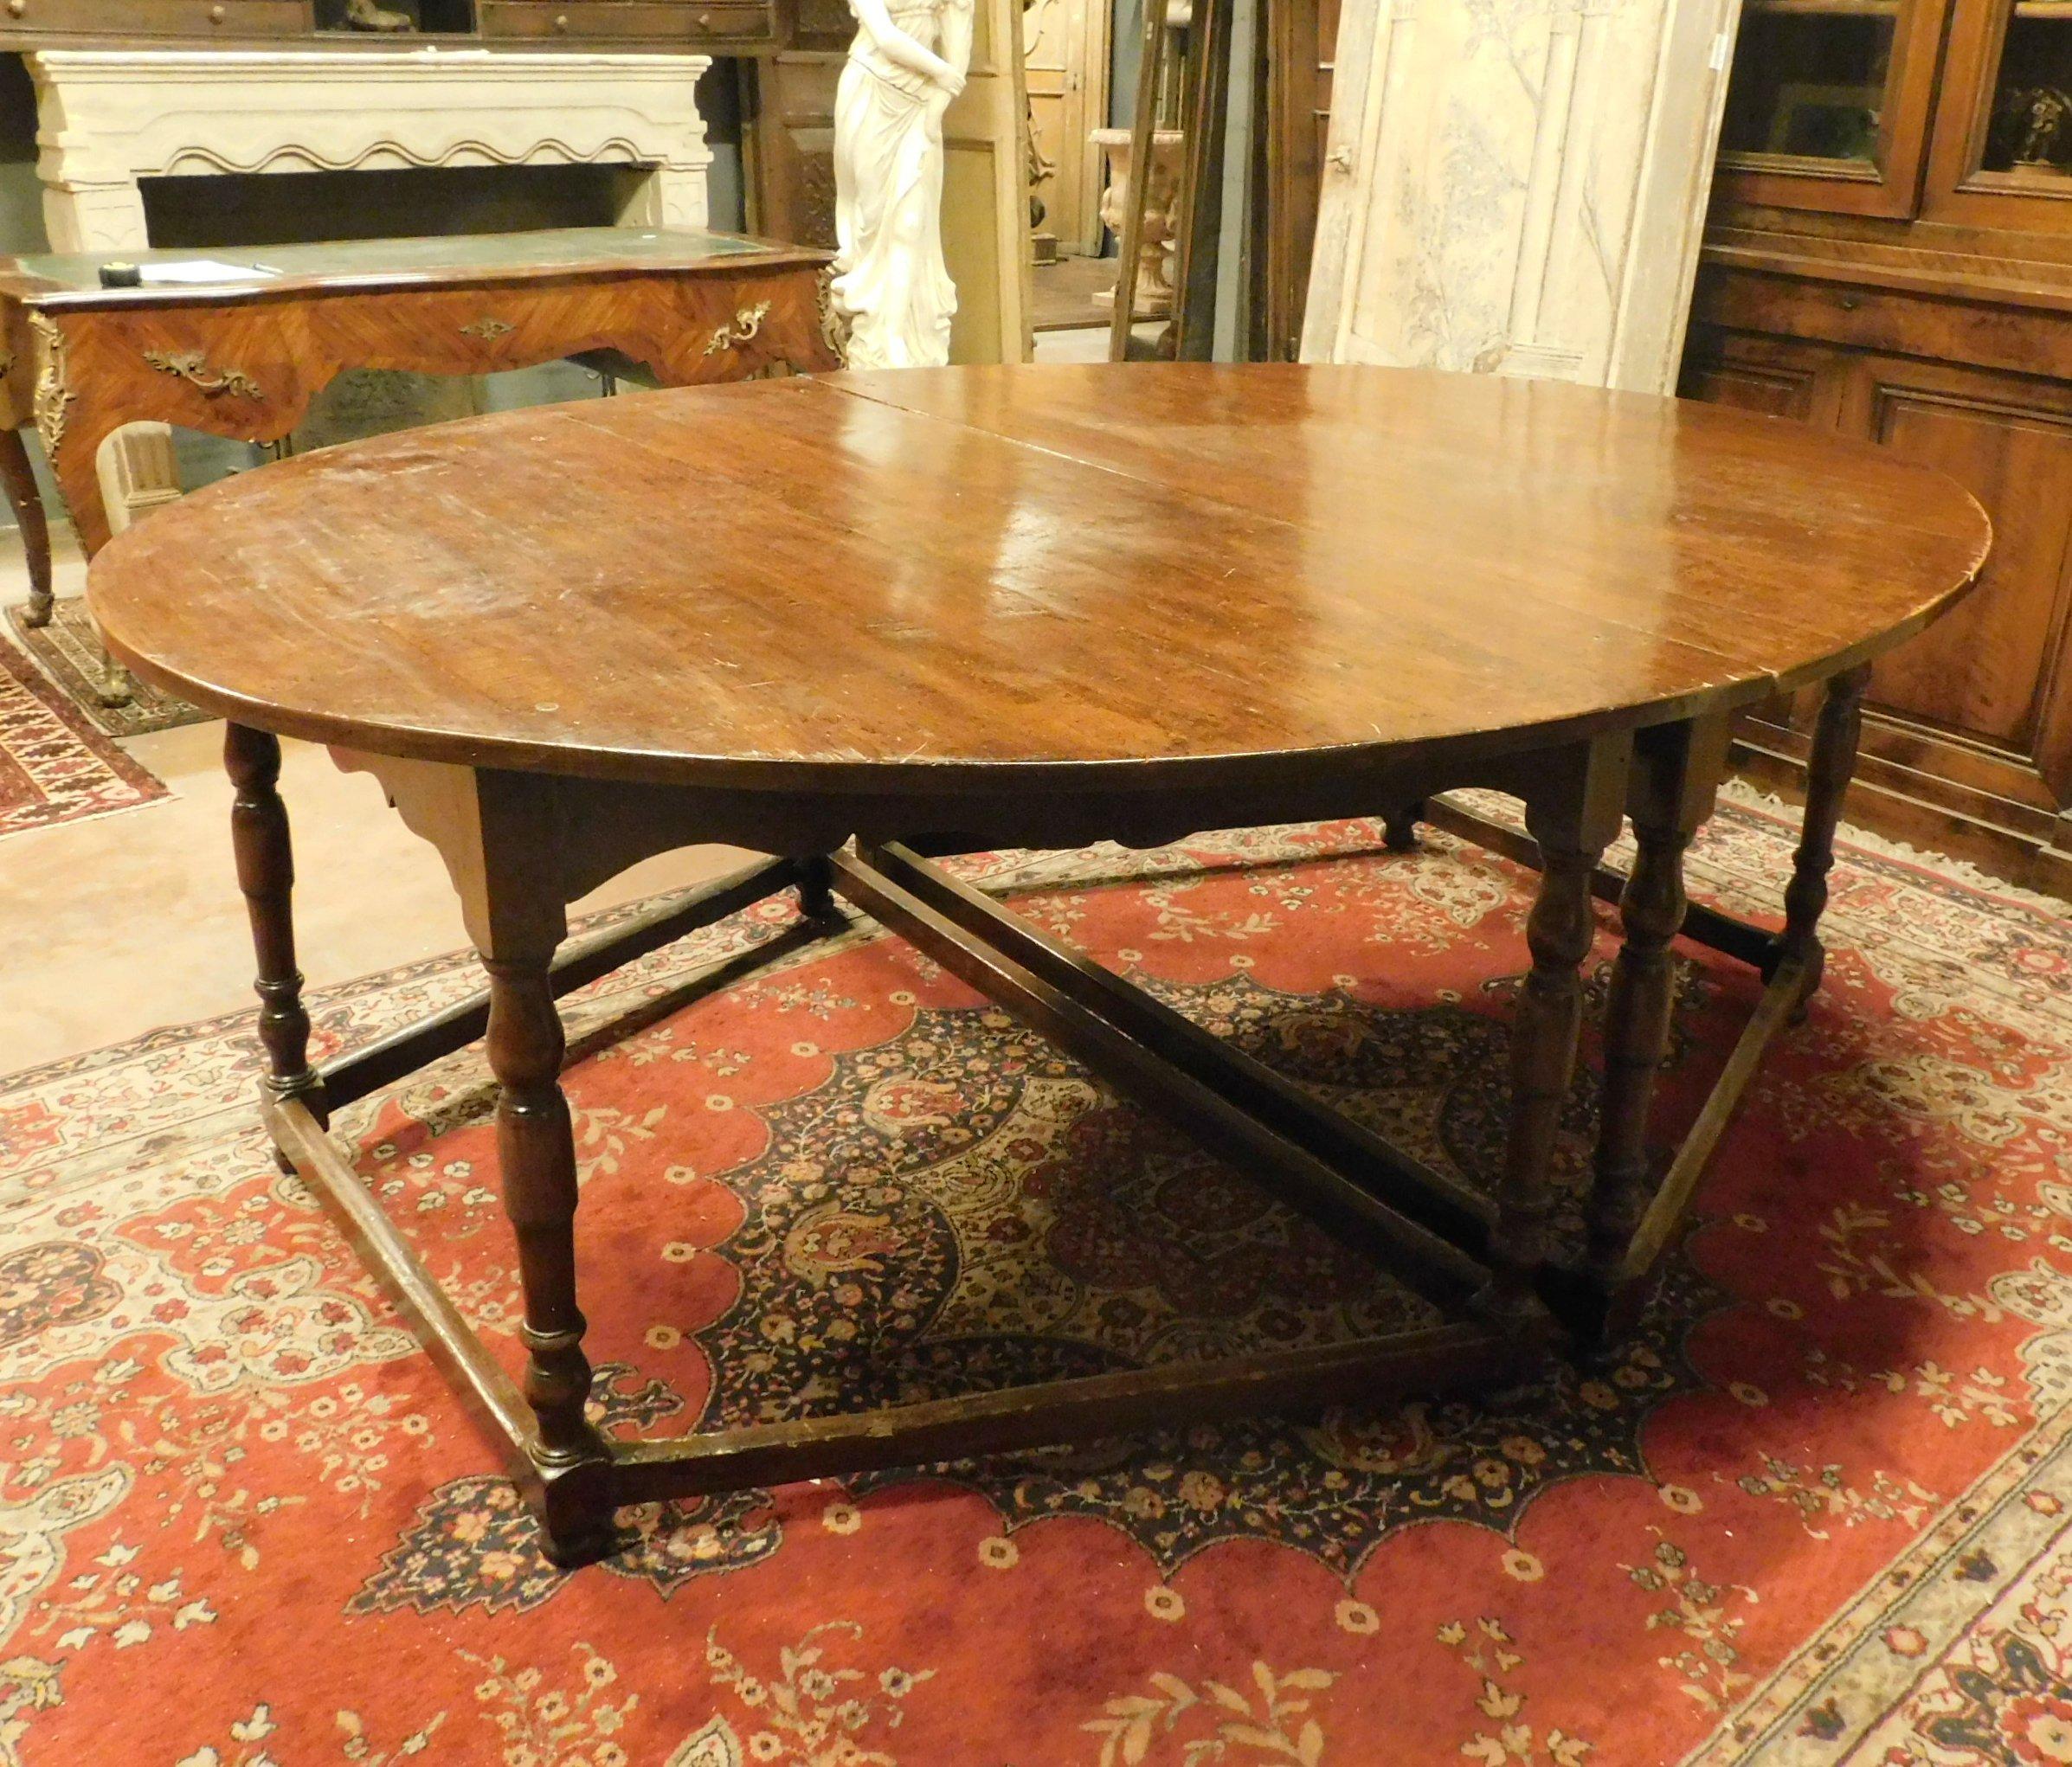 Antique Oval Table in Beechwood, Divisible 2 Half-Moons with 8 Legs, 1600, Italy For Sale 1